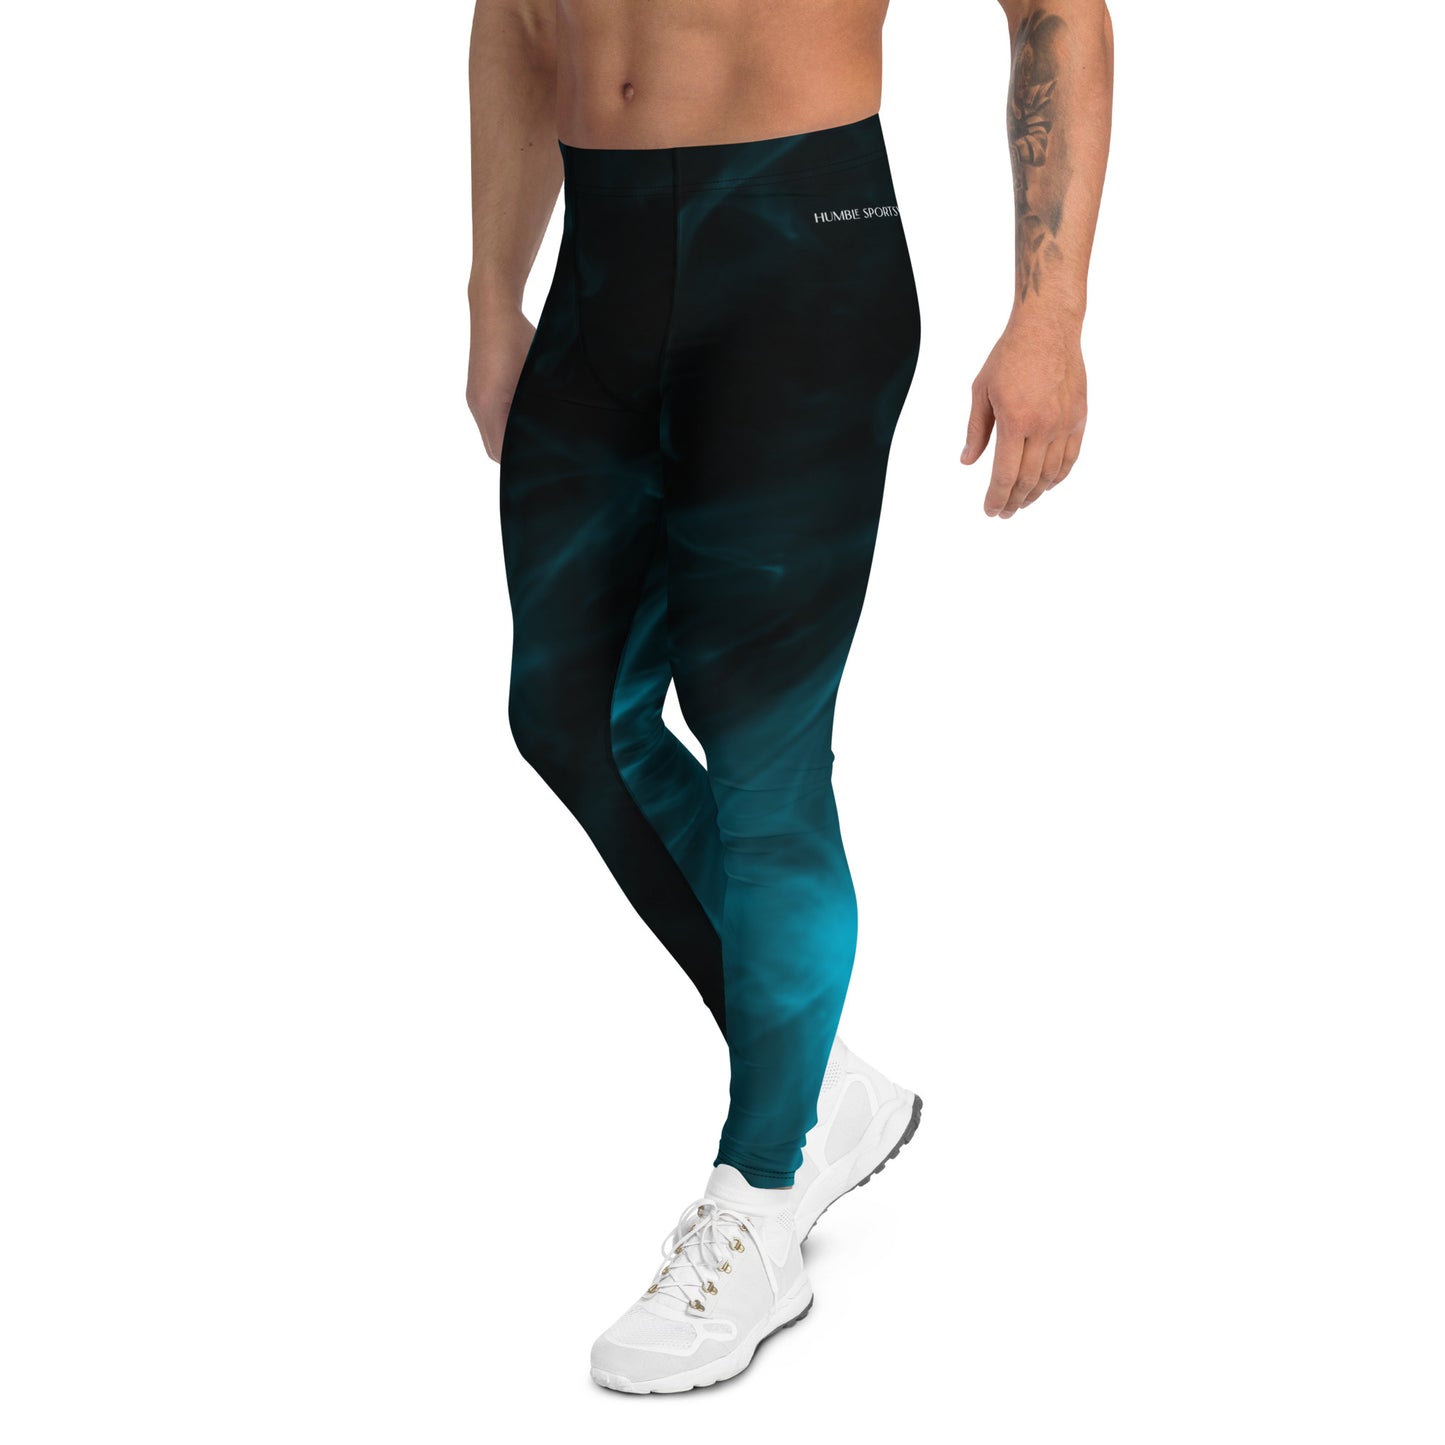 Humble sportswear, men's long gym activewear stretchy compression leggings, all over print